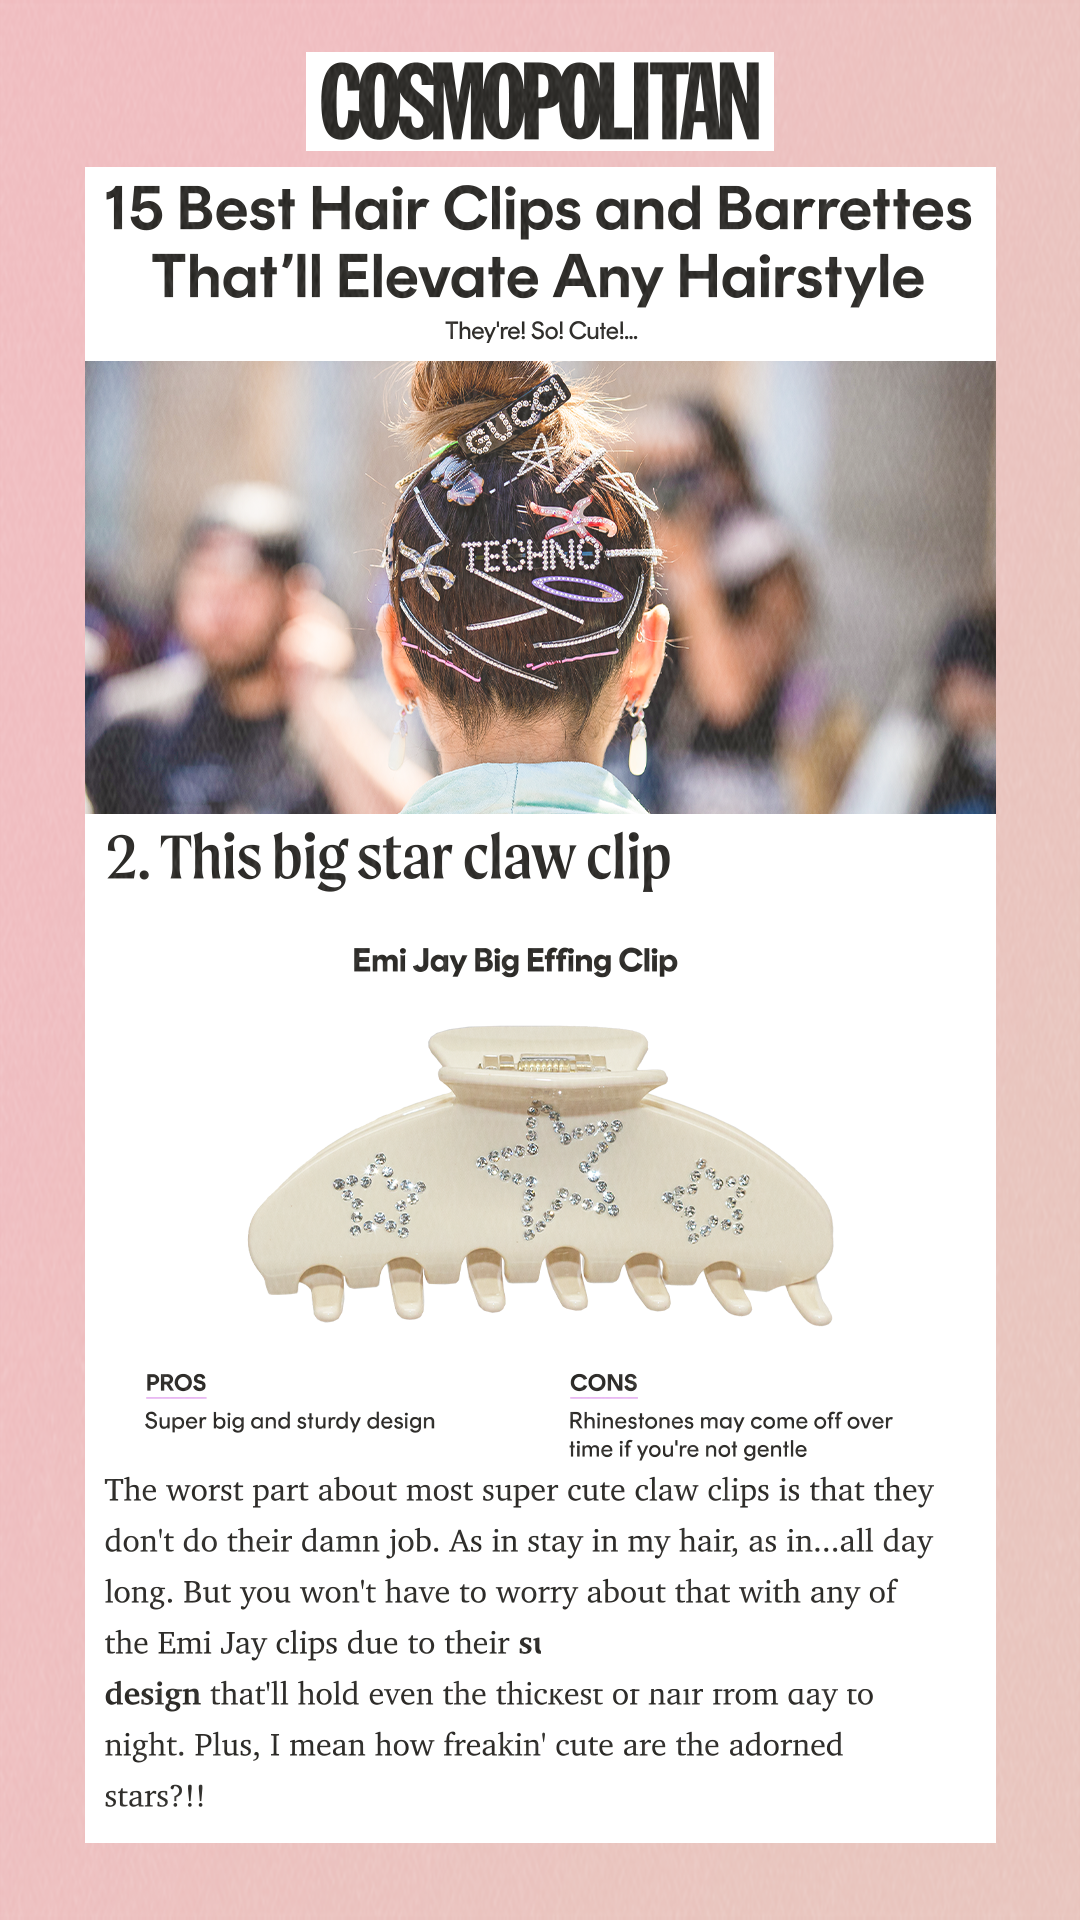 15 Best Hair Clips and Barrettes That’ll Elevate Any Hairstyle They're! So! Cute! Pros Super big and sturdy design Cons Rhinestones may come off over time if you're not gentle The worst part about most super cute claw clips is that they don't do their damn job. As in stay in my hair, as in...all day long. But you won't have to worry about that with any of the Emi Jay clips due to their super sturdy and large design that'll hold even the thickest of hair from day to night. Plus, I mean how freakin' cute are the adorned stars?!!